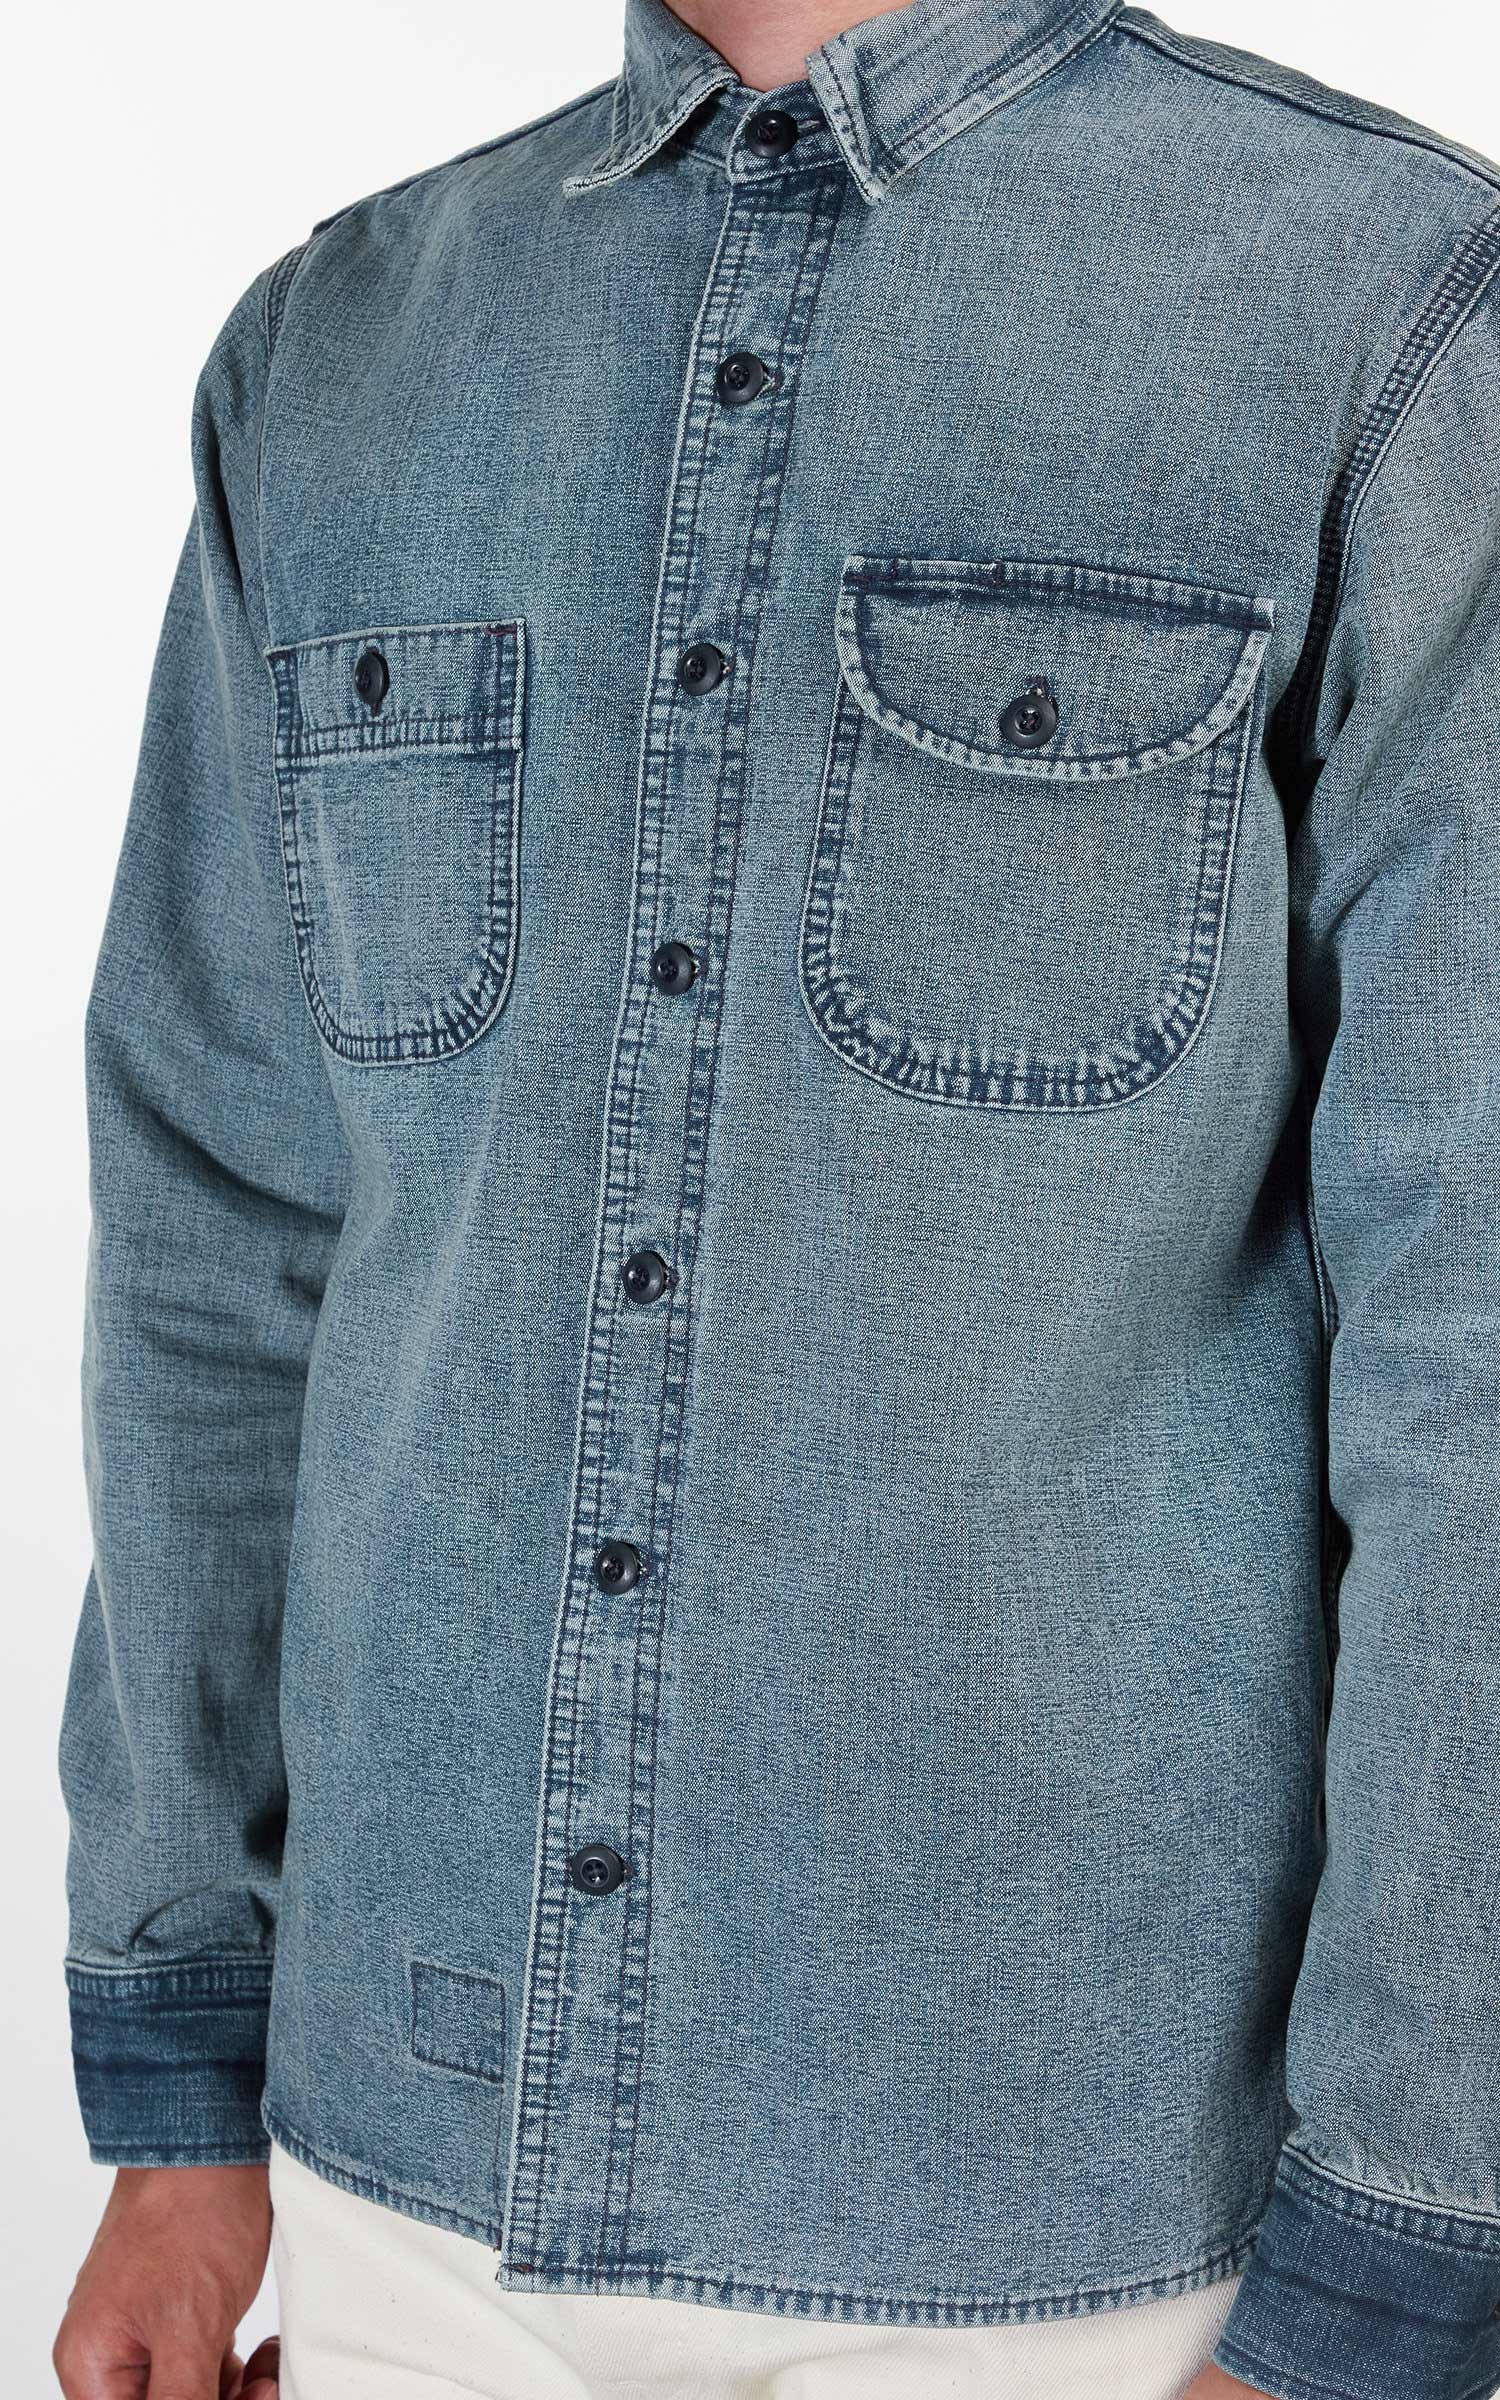 Rogue Territory Work Shirt Washed Out Indigo Selvedge Canvas | Cultizm